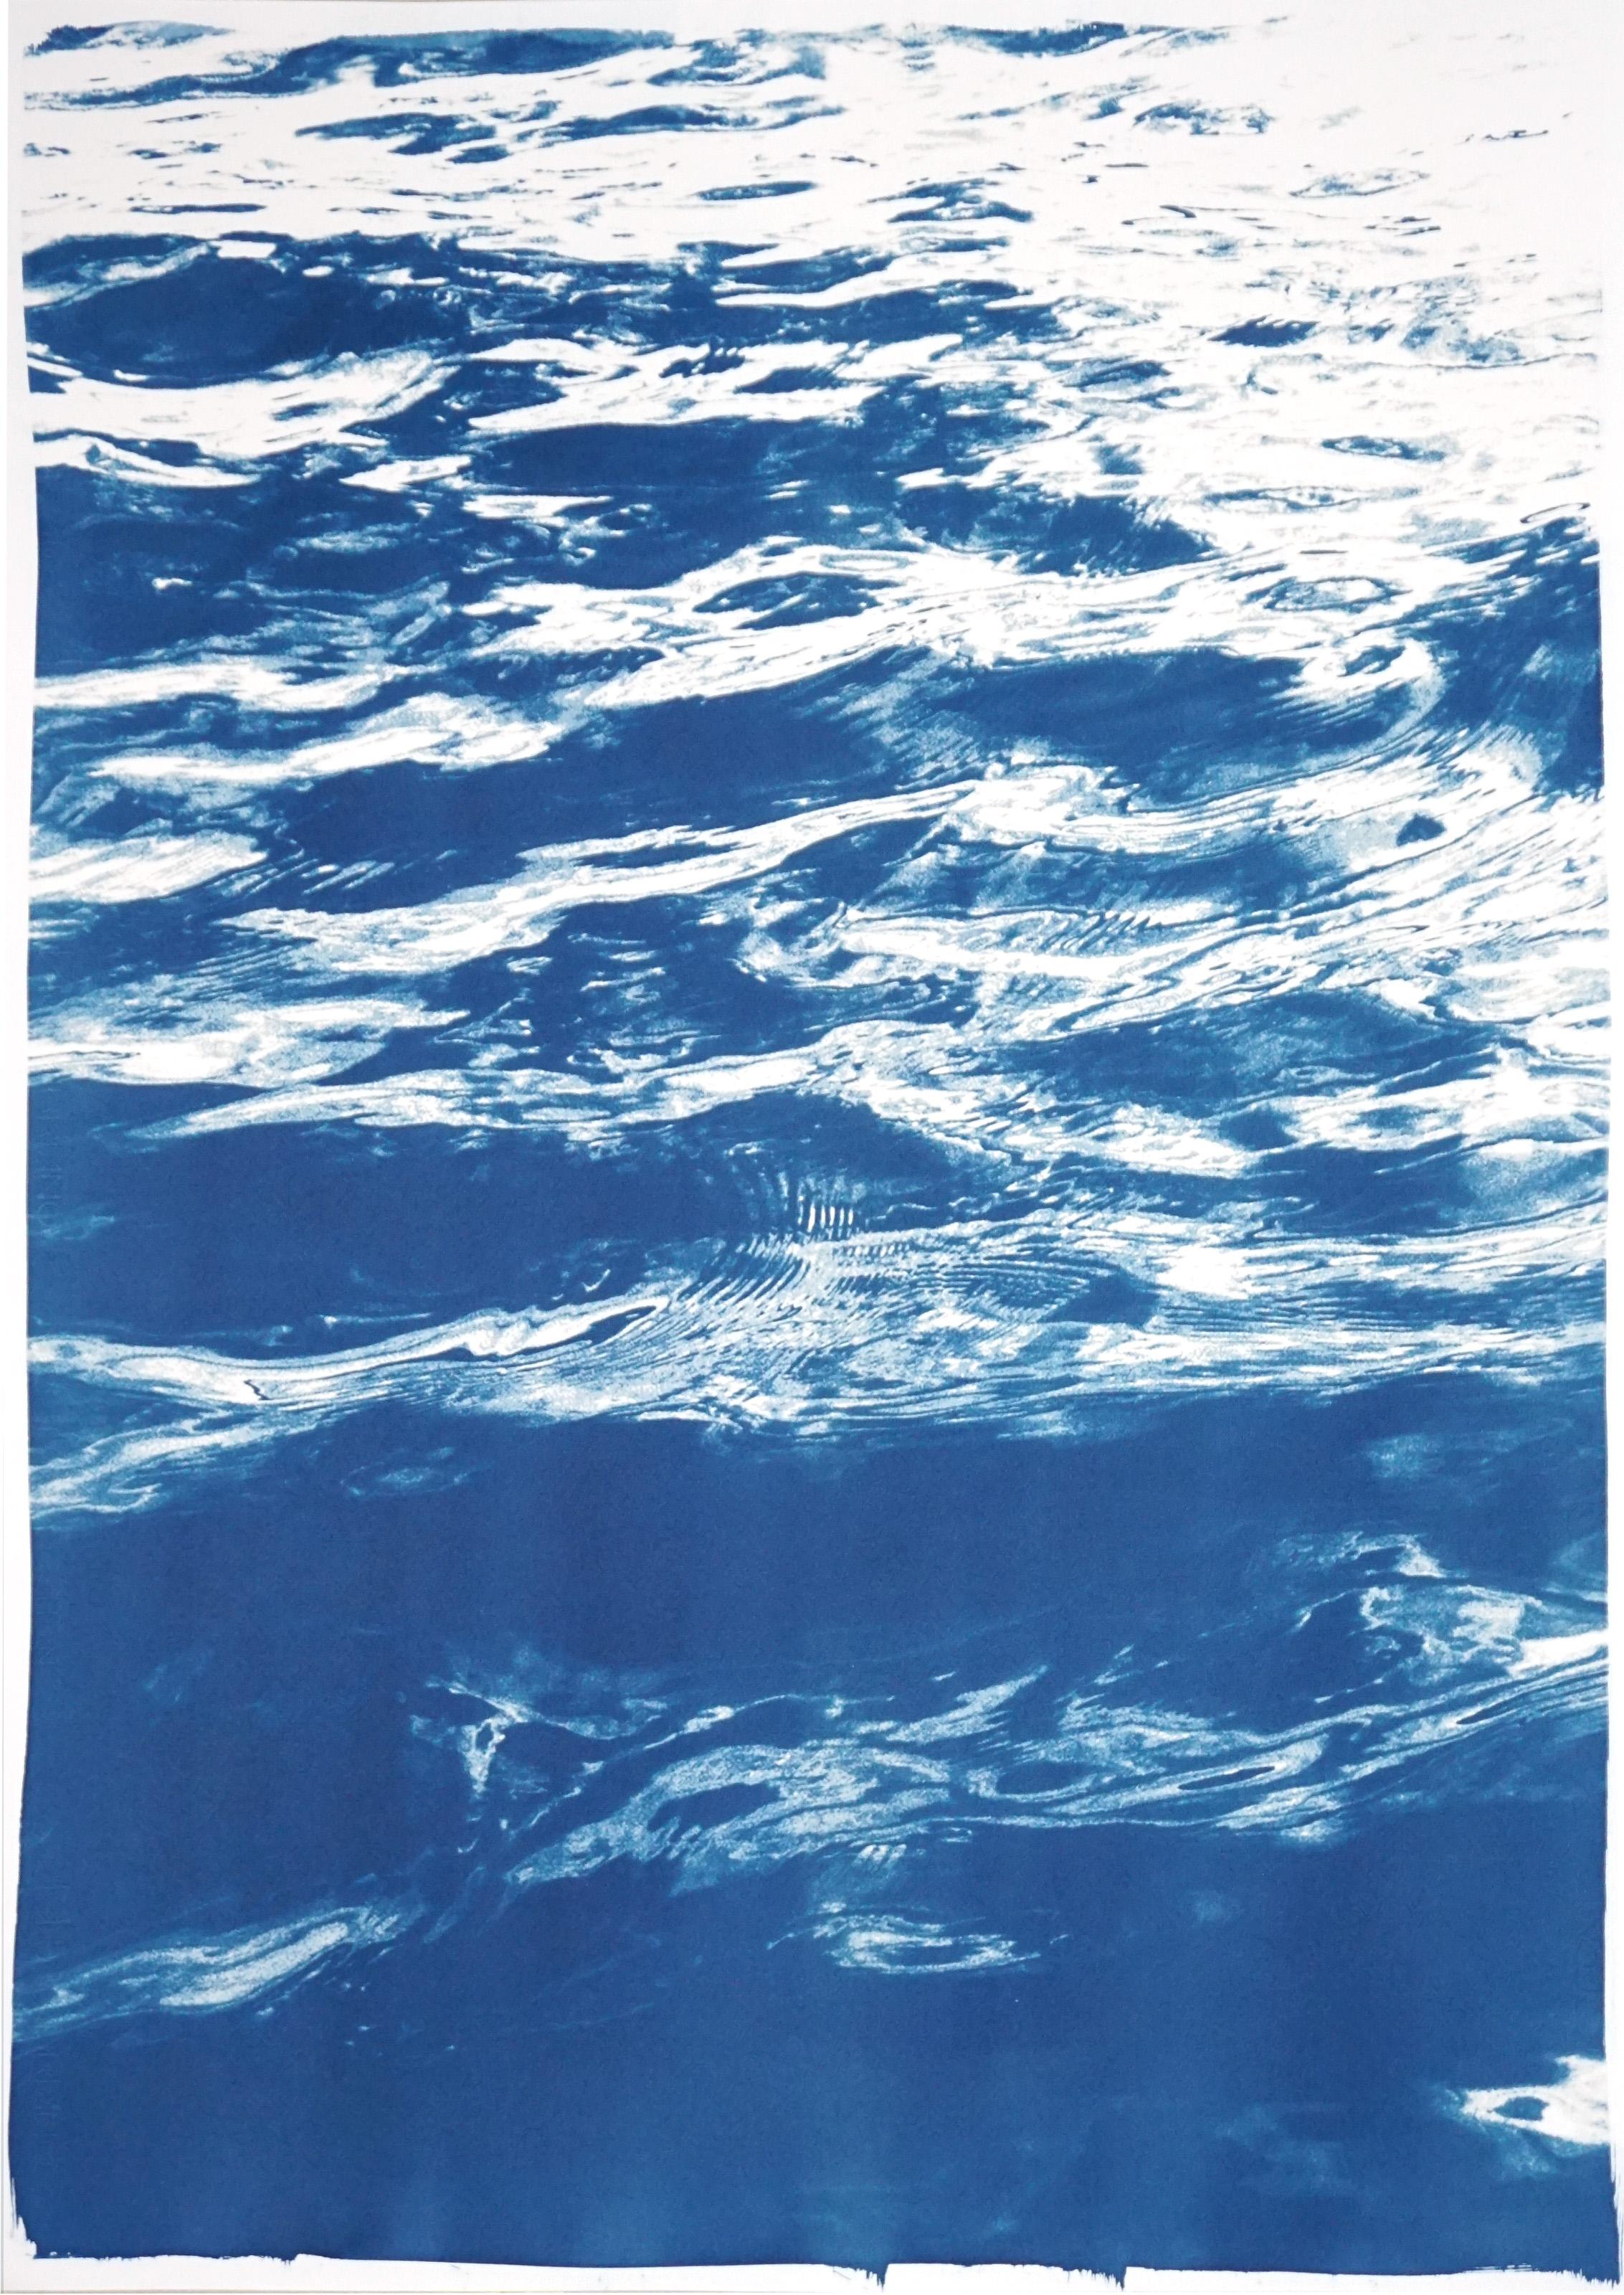 This is an exclusive handprinted limited edition cyanotype.
This beautiful triptych is called 